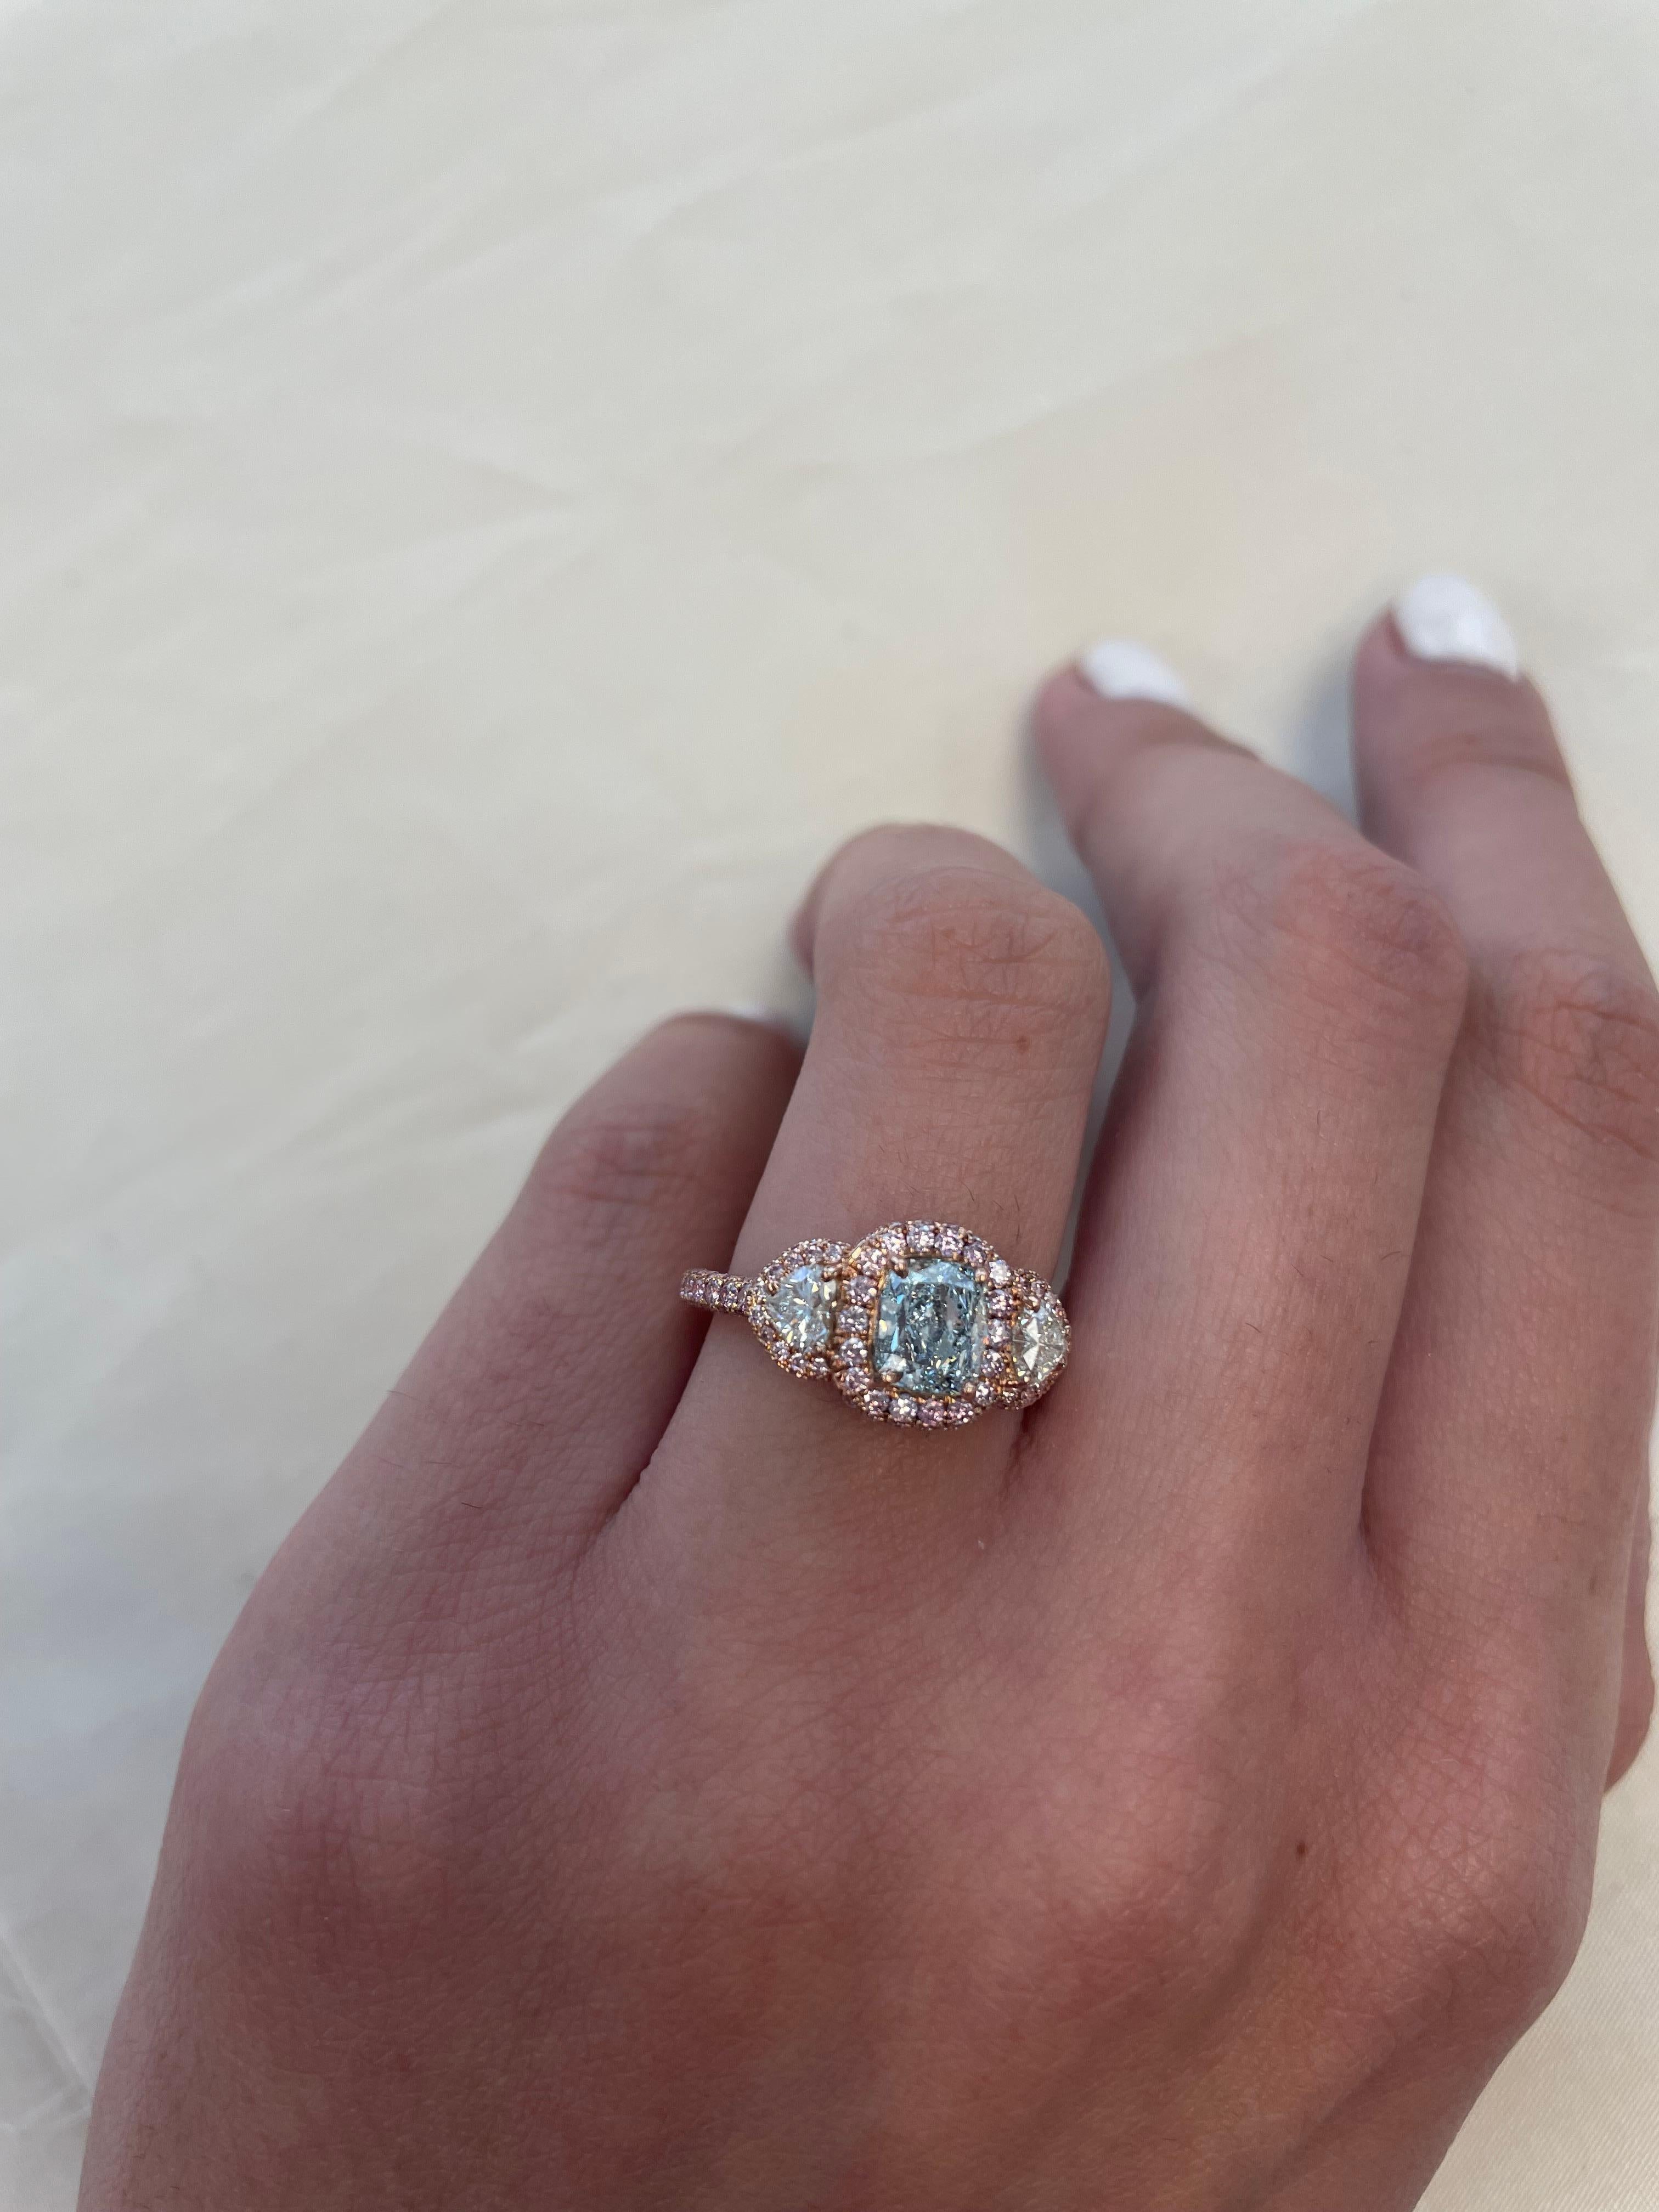 Exquisite and very rare fancy greenish blue diamond with Argyle fancy pink diamonds, GIA certified. 
High jewelry by Alexander Beverly Hills.
Center 1.02 carat cushion diamond, fancy greenish blue color grade and I1 clarity grade. Complimented with